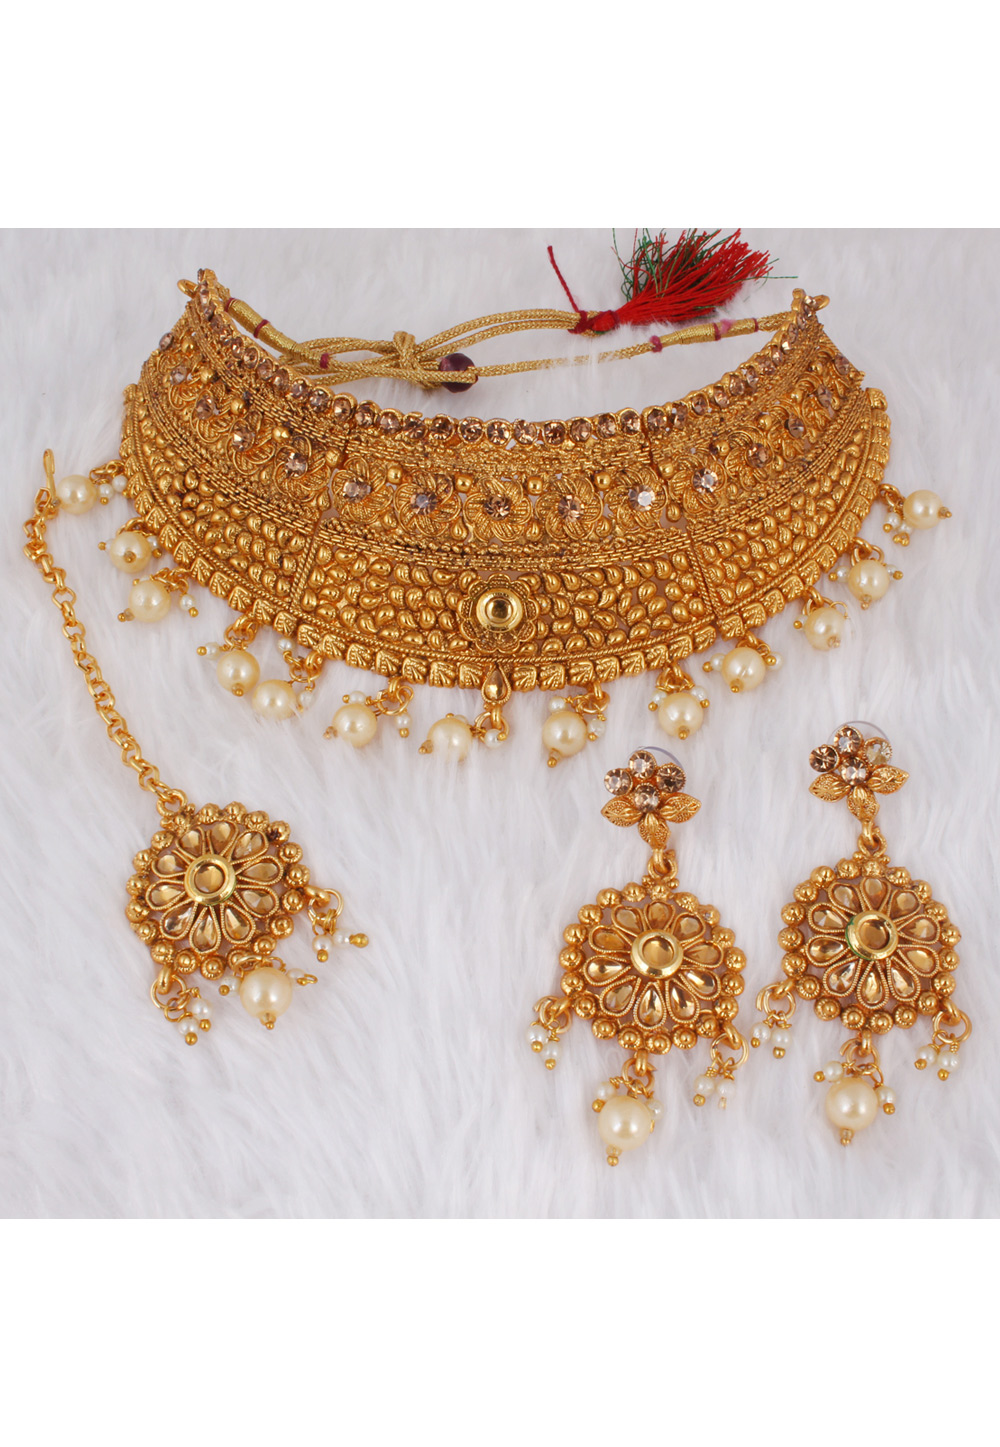 Off White Alloy Necklace Set With Earrings and Maang Tikka 257343